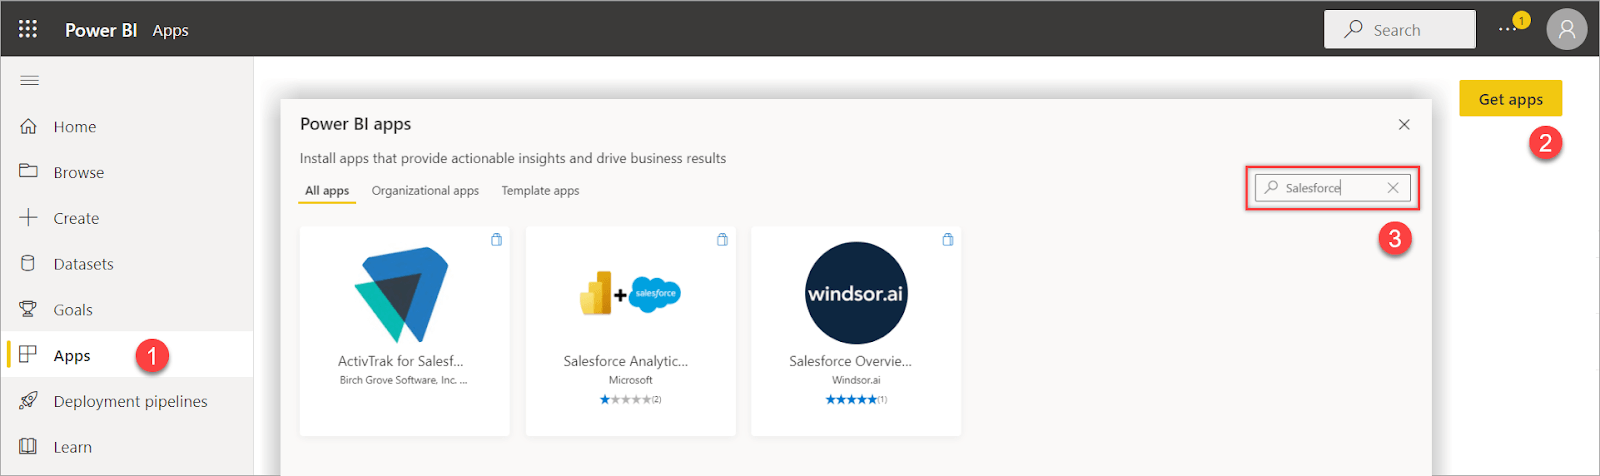 1 Power BI connect to Salesforce template apps